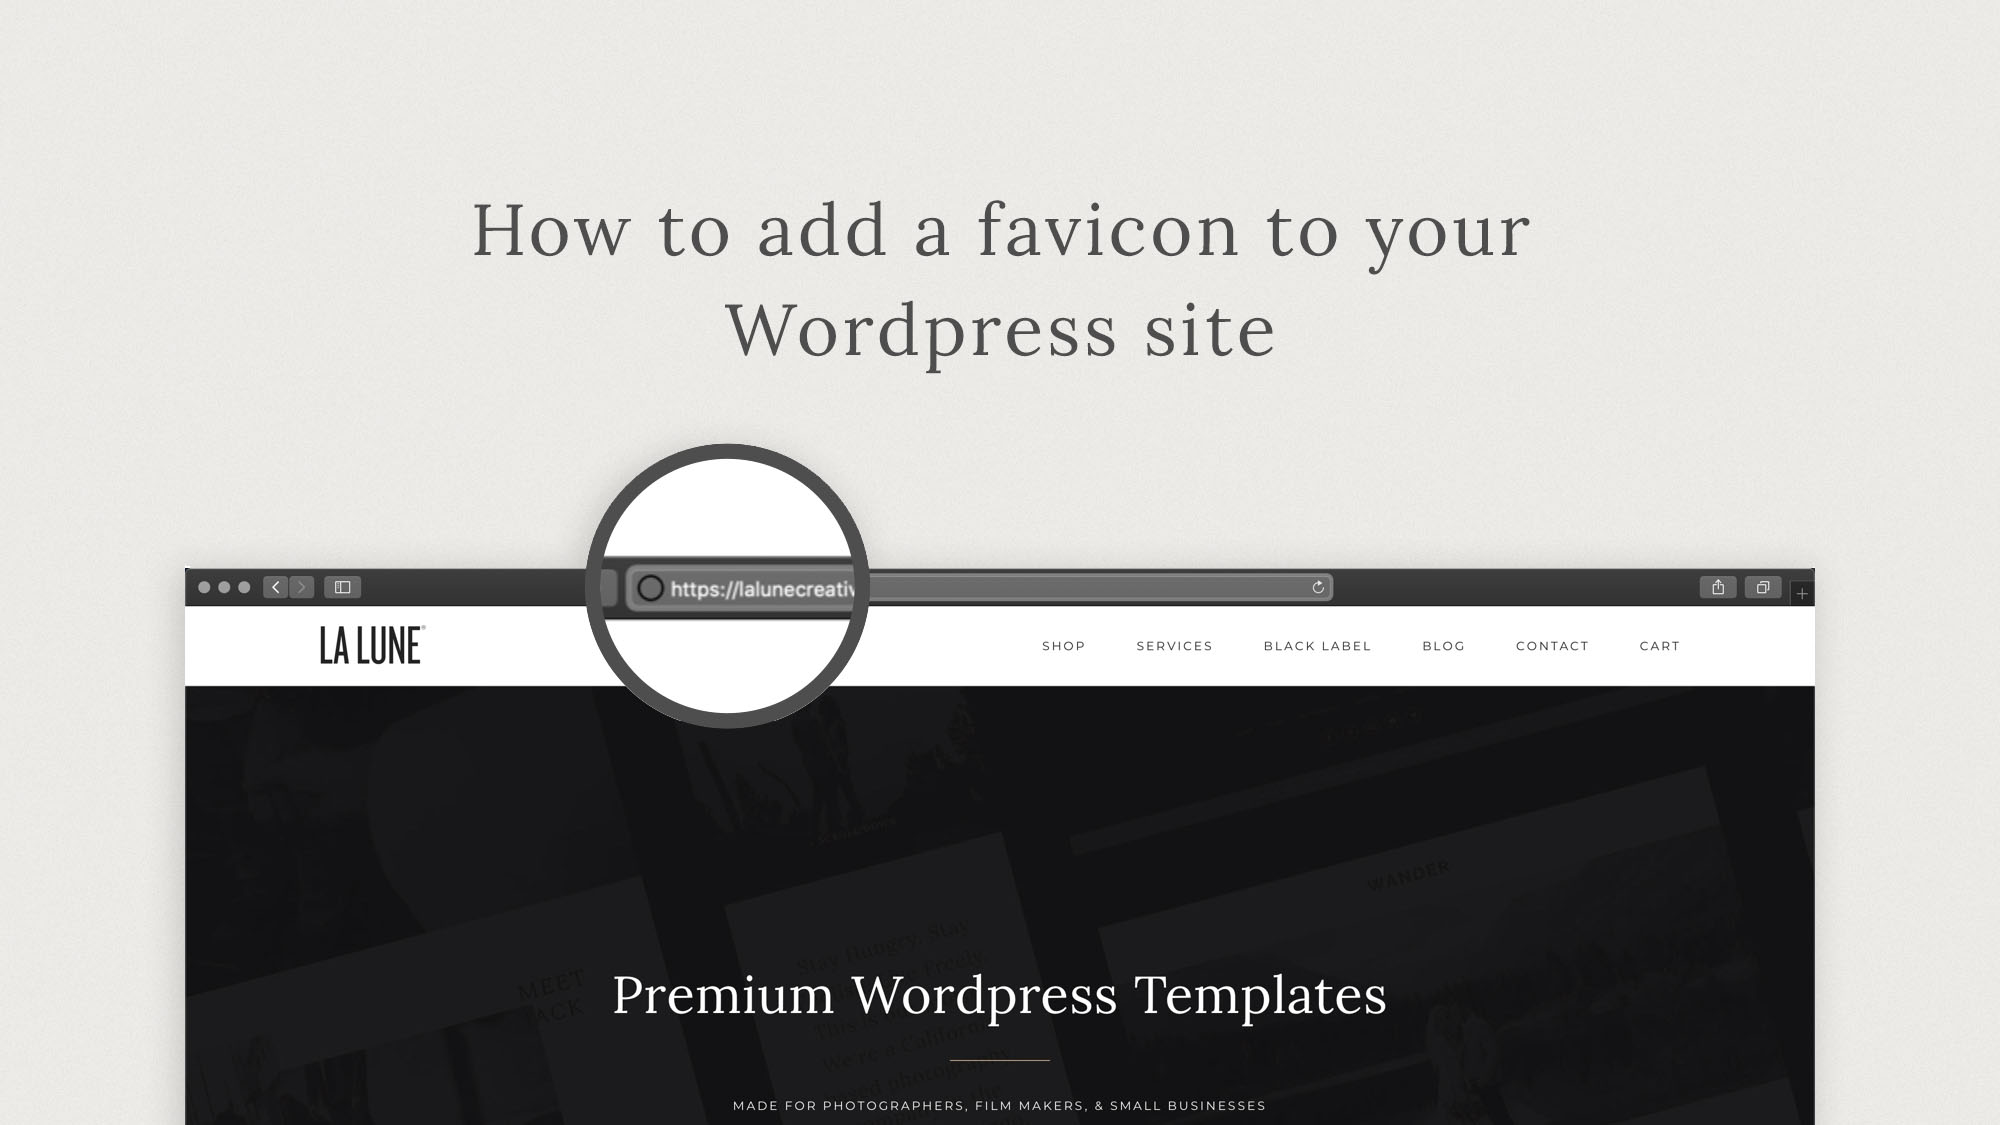 How to add a favicon to your WordPress site.